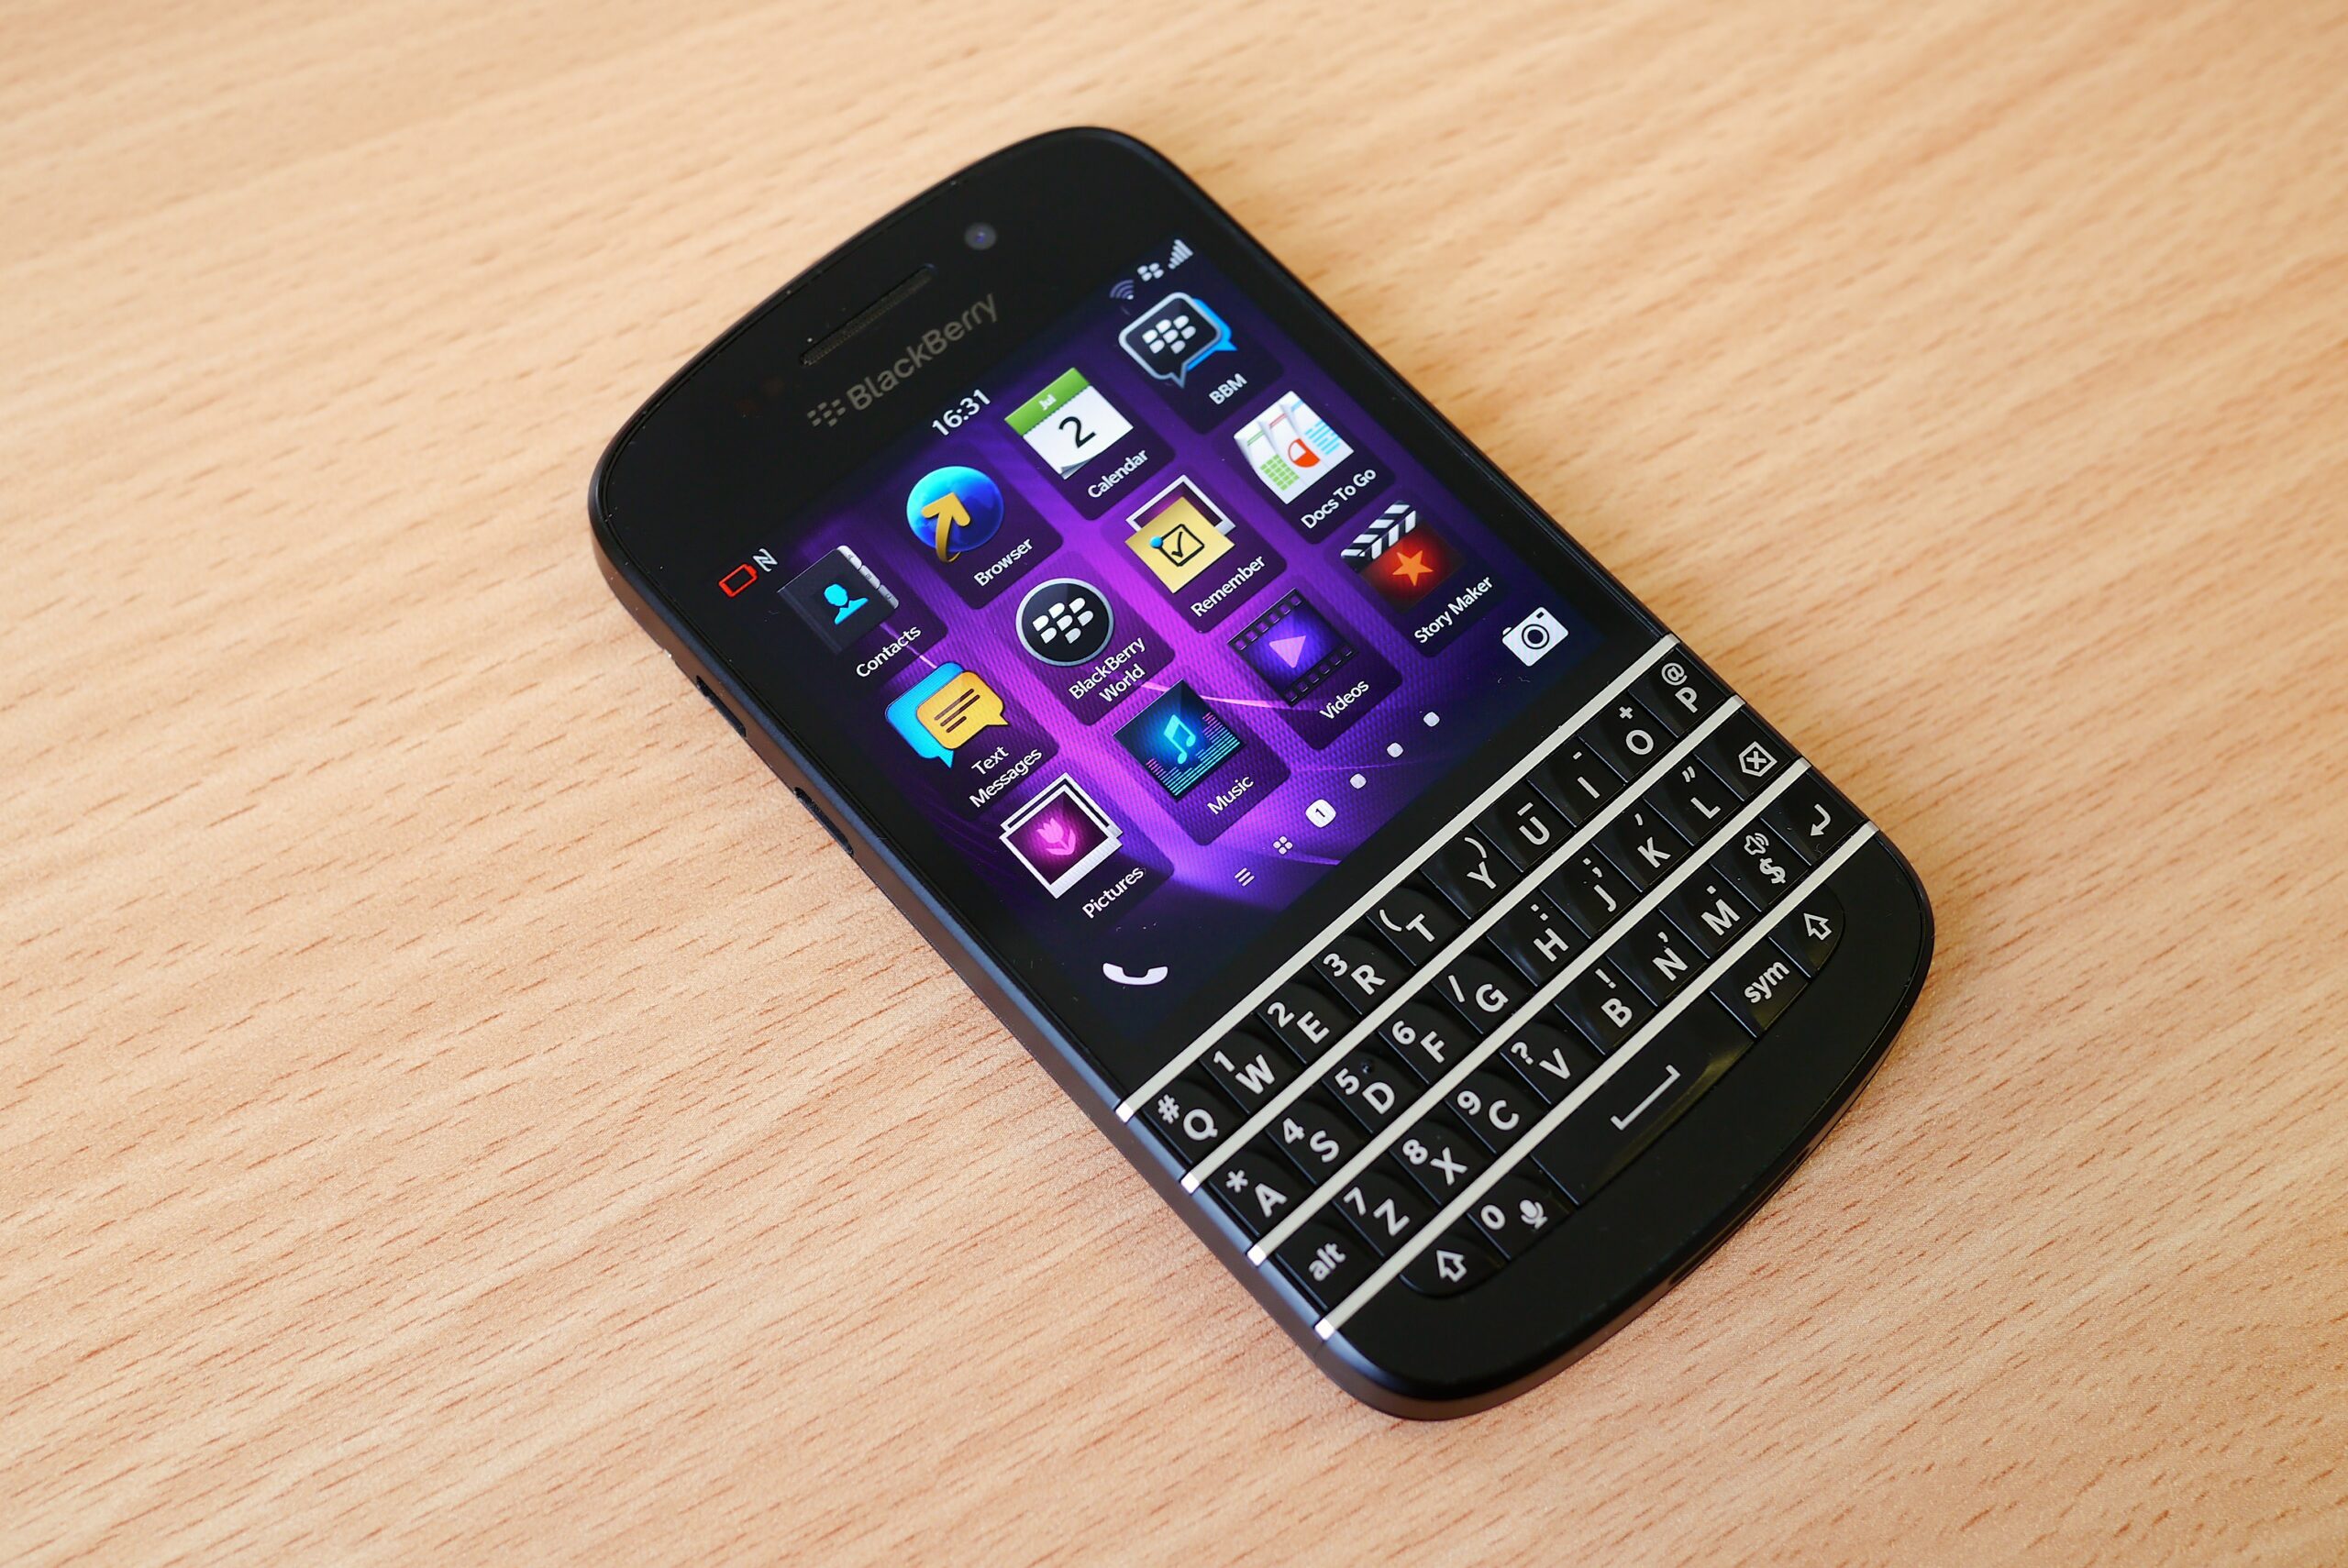 BlackBerry May Produce Antibacterial Cell Phones For Hospitals